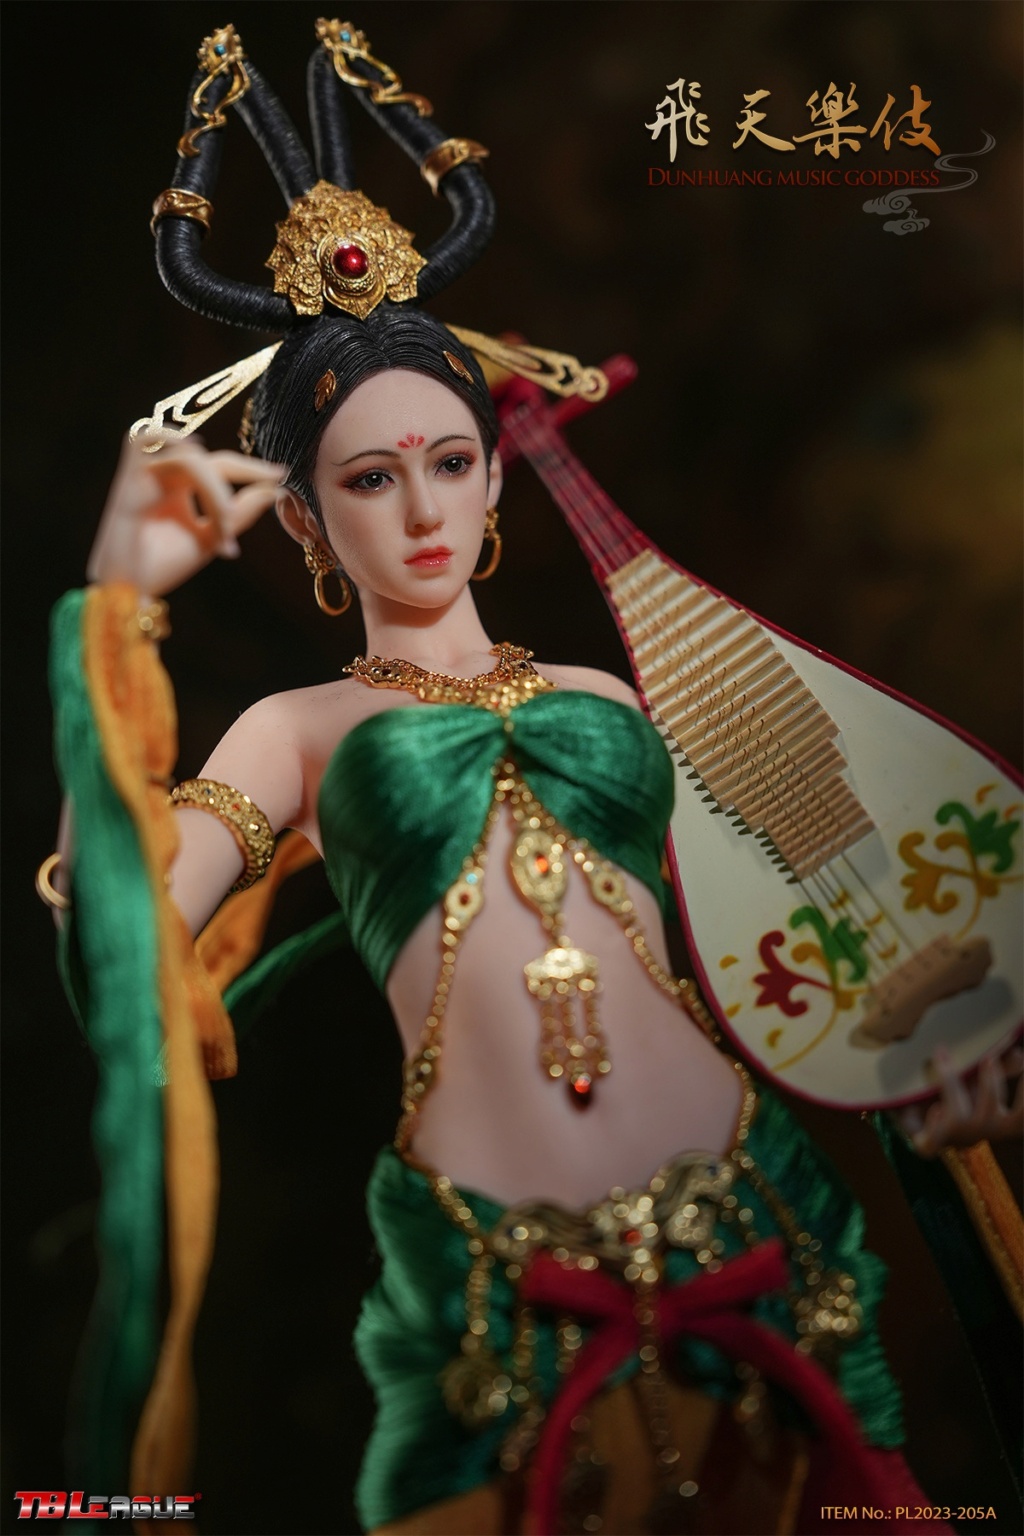 MusicGoddess - NEW PRODUCT: TBLeague: PL2023-205 1/6 Scale Dunhuang Music Goddess (2 versions) 15121311